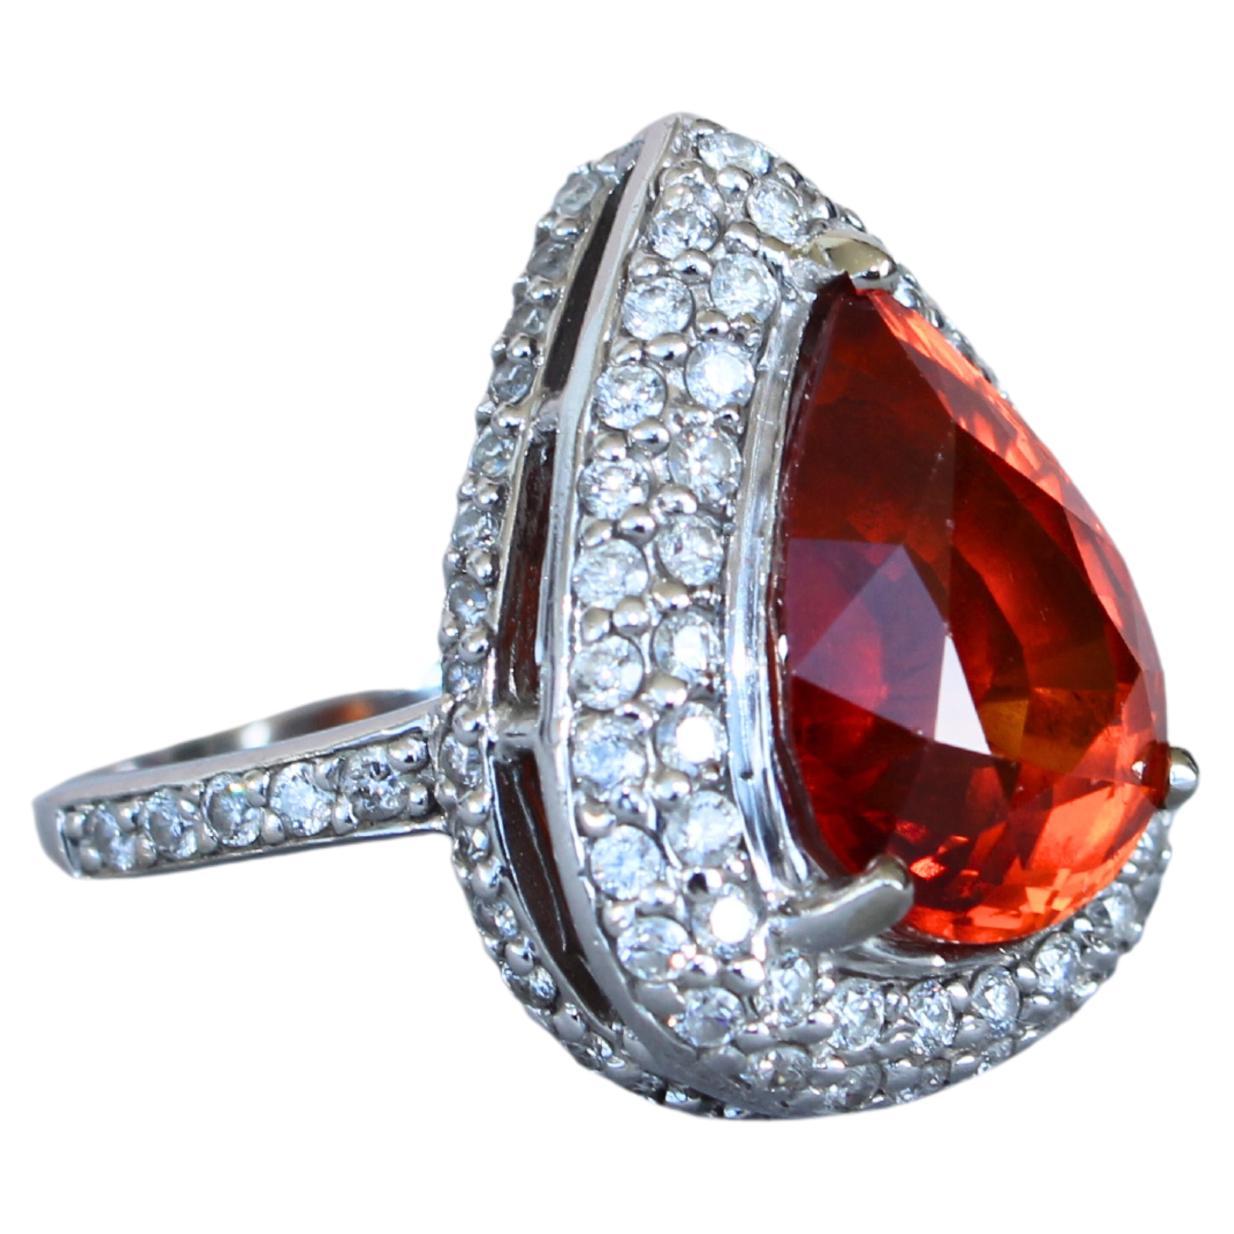 Mandarin Garnet Spessartine Pear Drop Shape Diamond Halo Pave White Gold Ring
8 Carats of Stunning Mandarin Garnet Spessartine in Pear-Shape Brilliant Cut Form
10.1 grams total weight
14K White Gold
14 x 10 mm length width ratio of center stone
2.00